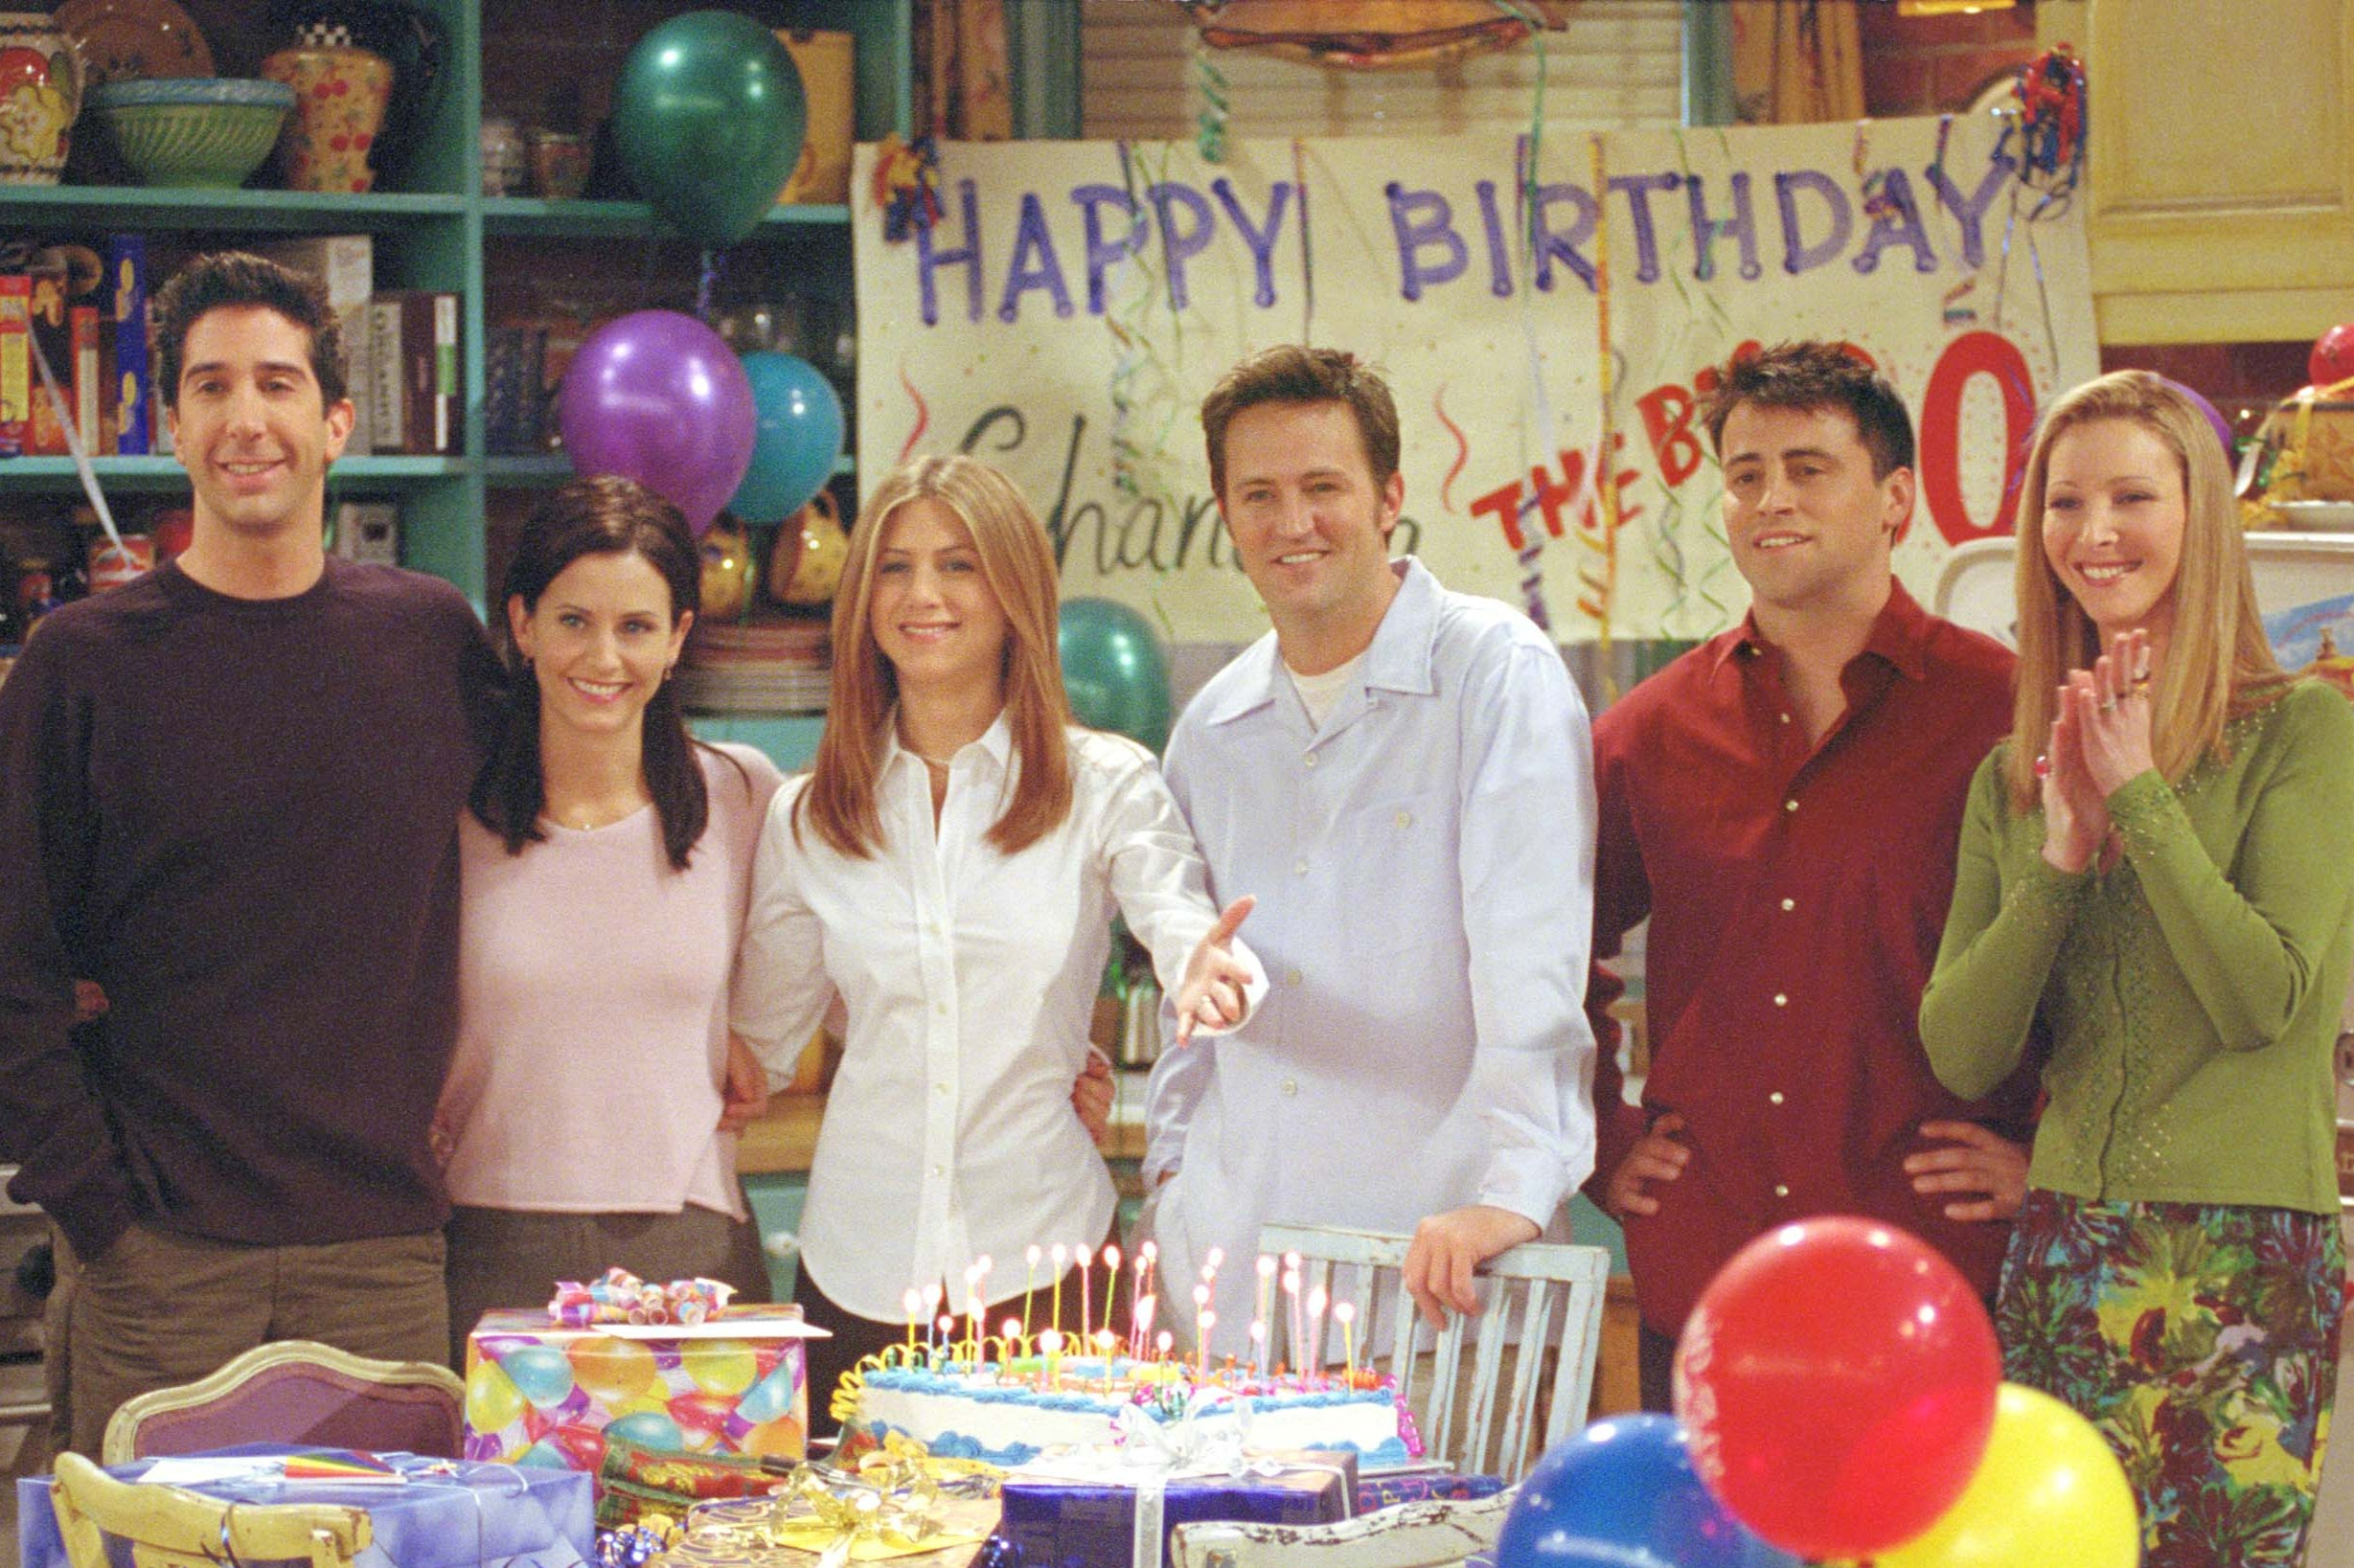 TV series like ‘Friends’ have often promoted idealised versions of large friendship groups